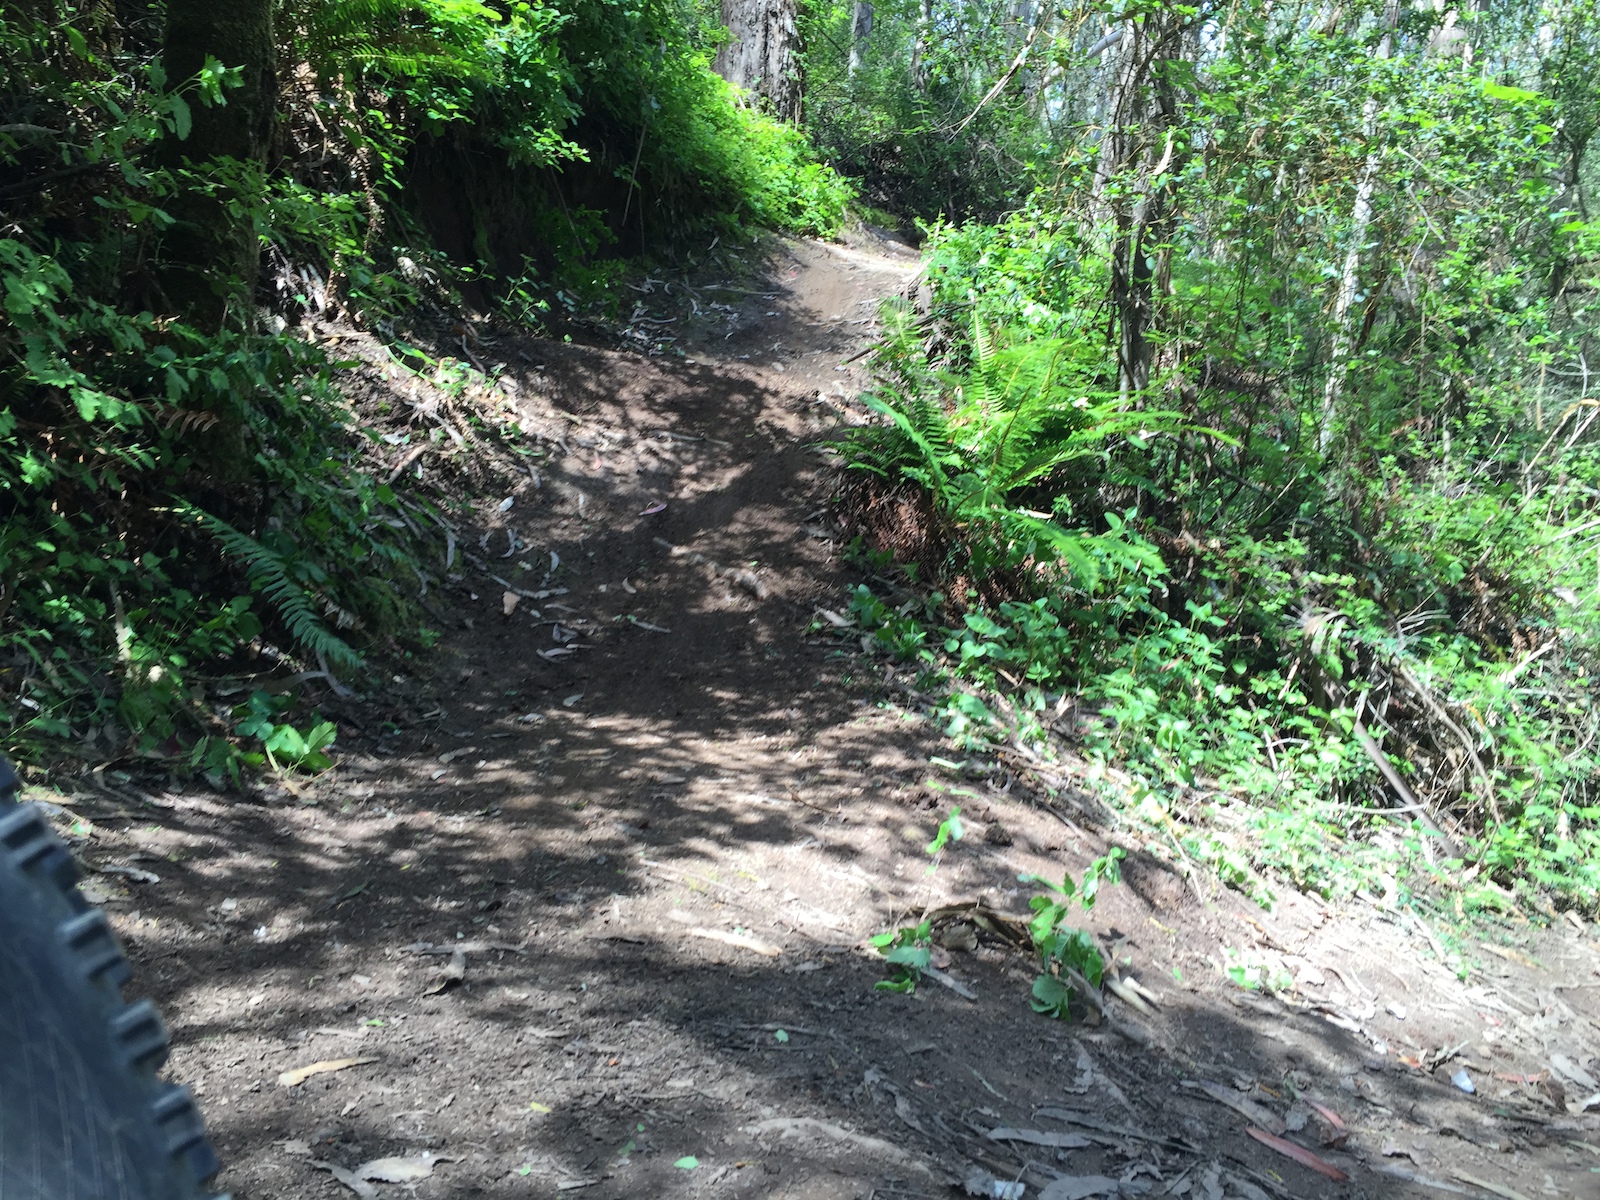 this is a step up jump in the middle of the trail that needed some tlc, the run in is pretty bumpy